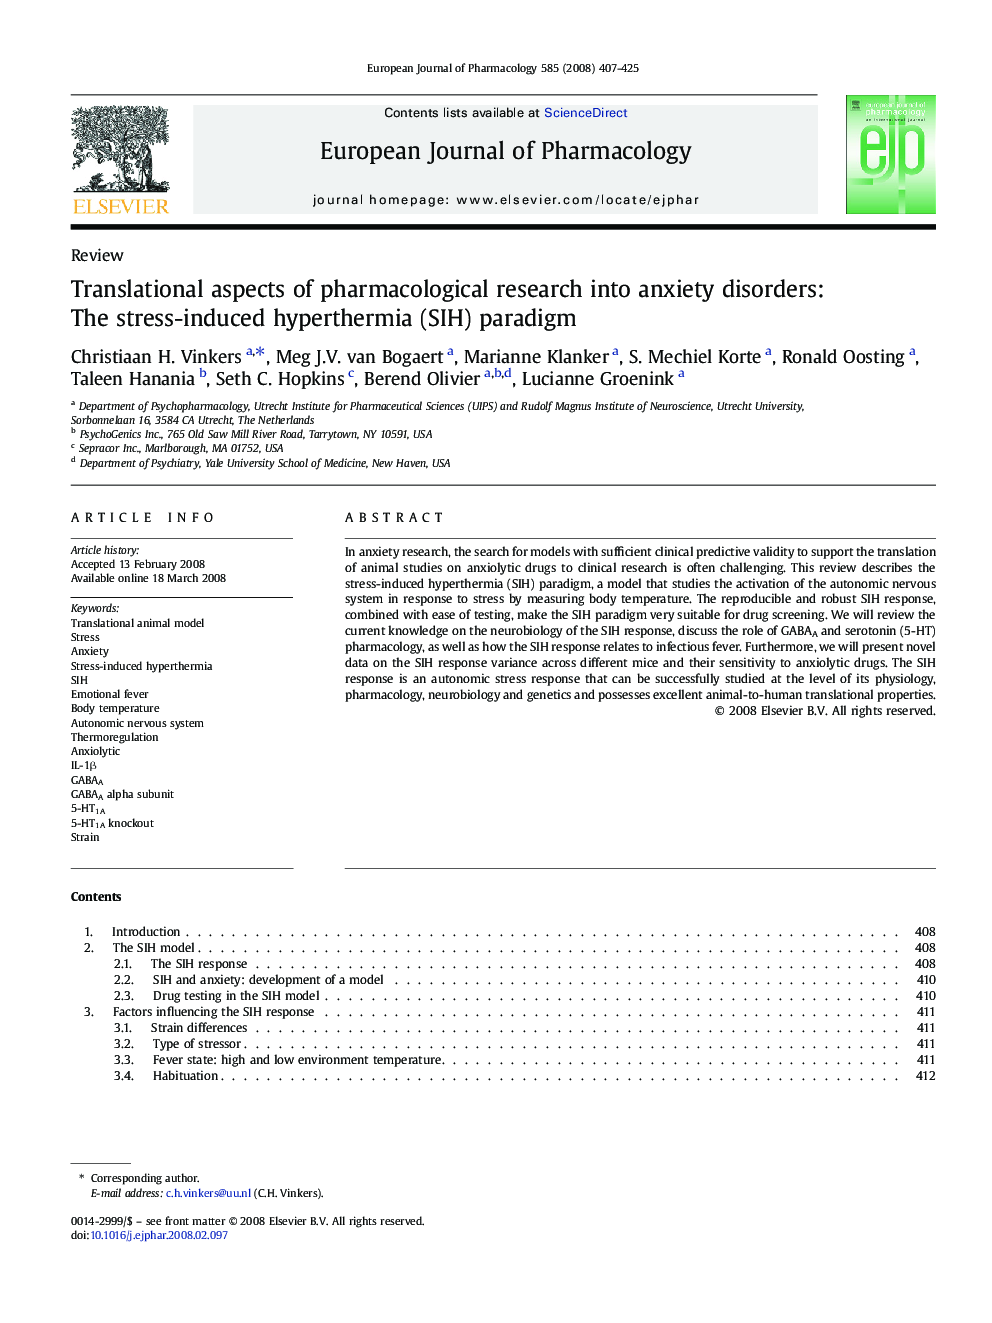 Translational aspects of pharmacological research into anxiety disorders: The stress-induced hyperthermia (SIH) paradigm